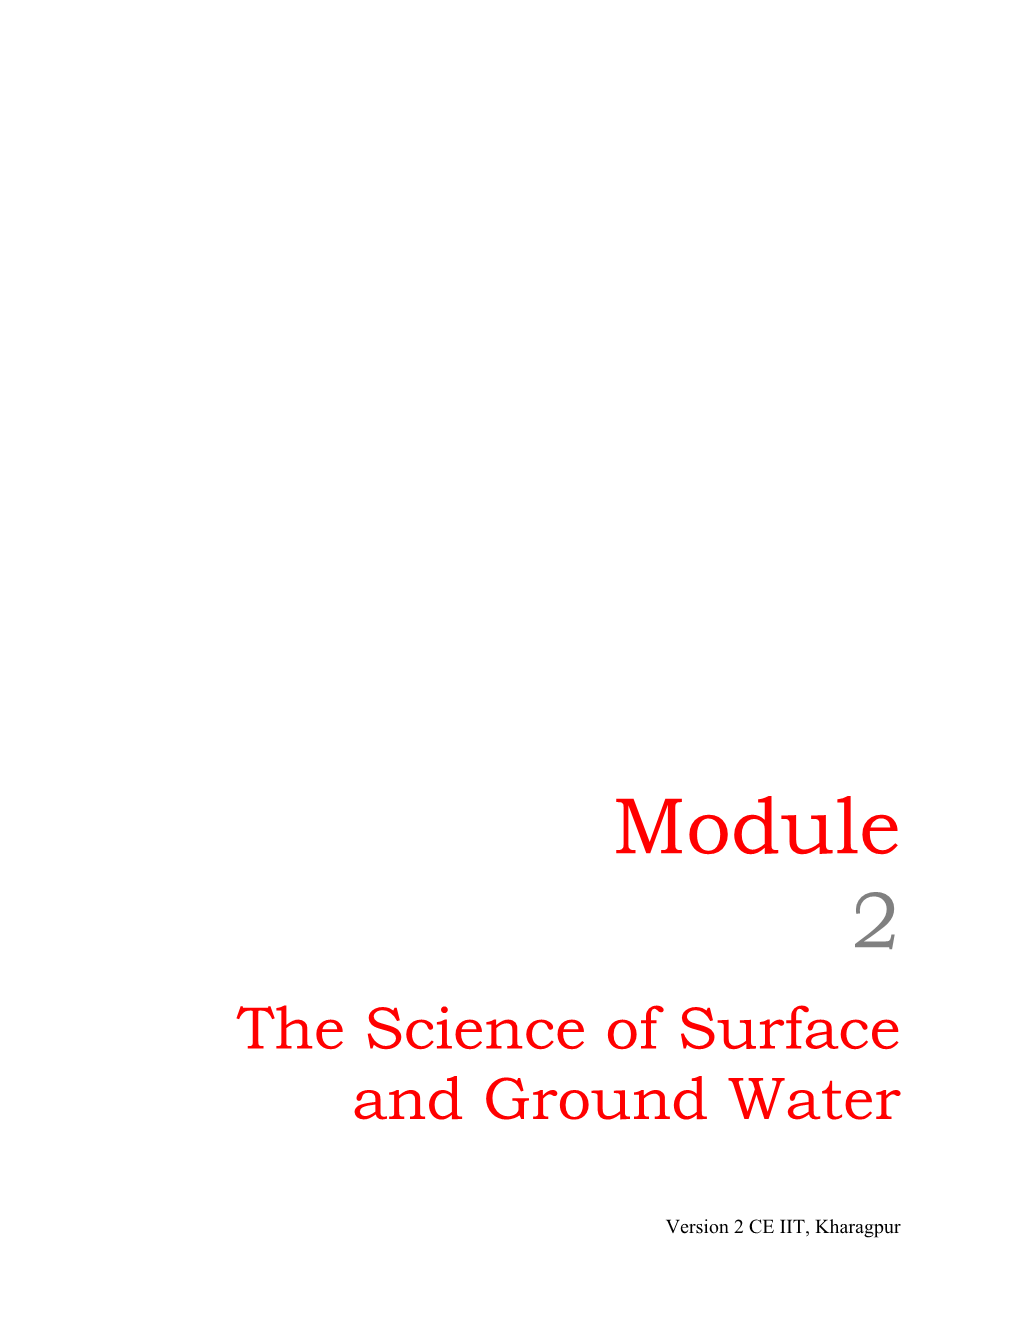 Subsurface Movement of Water